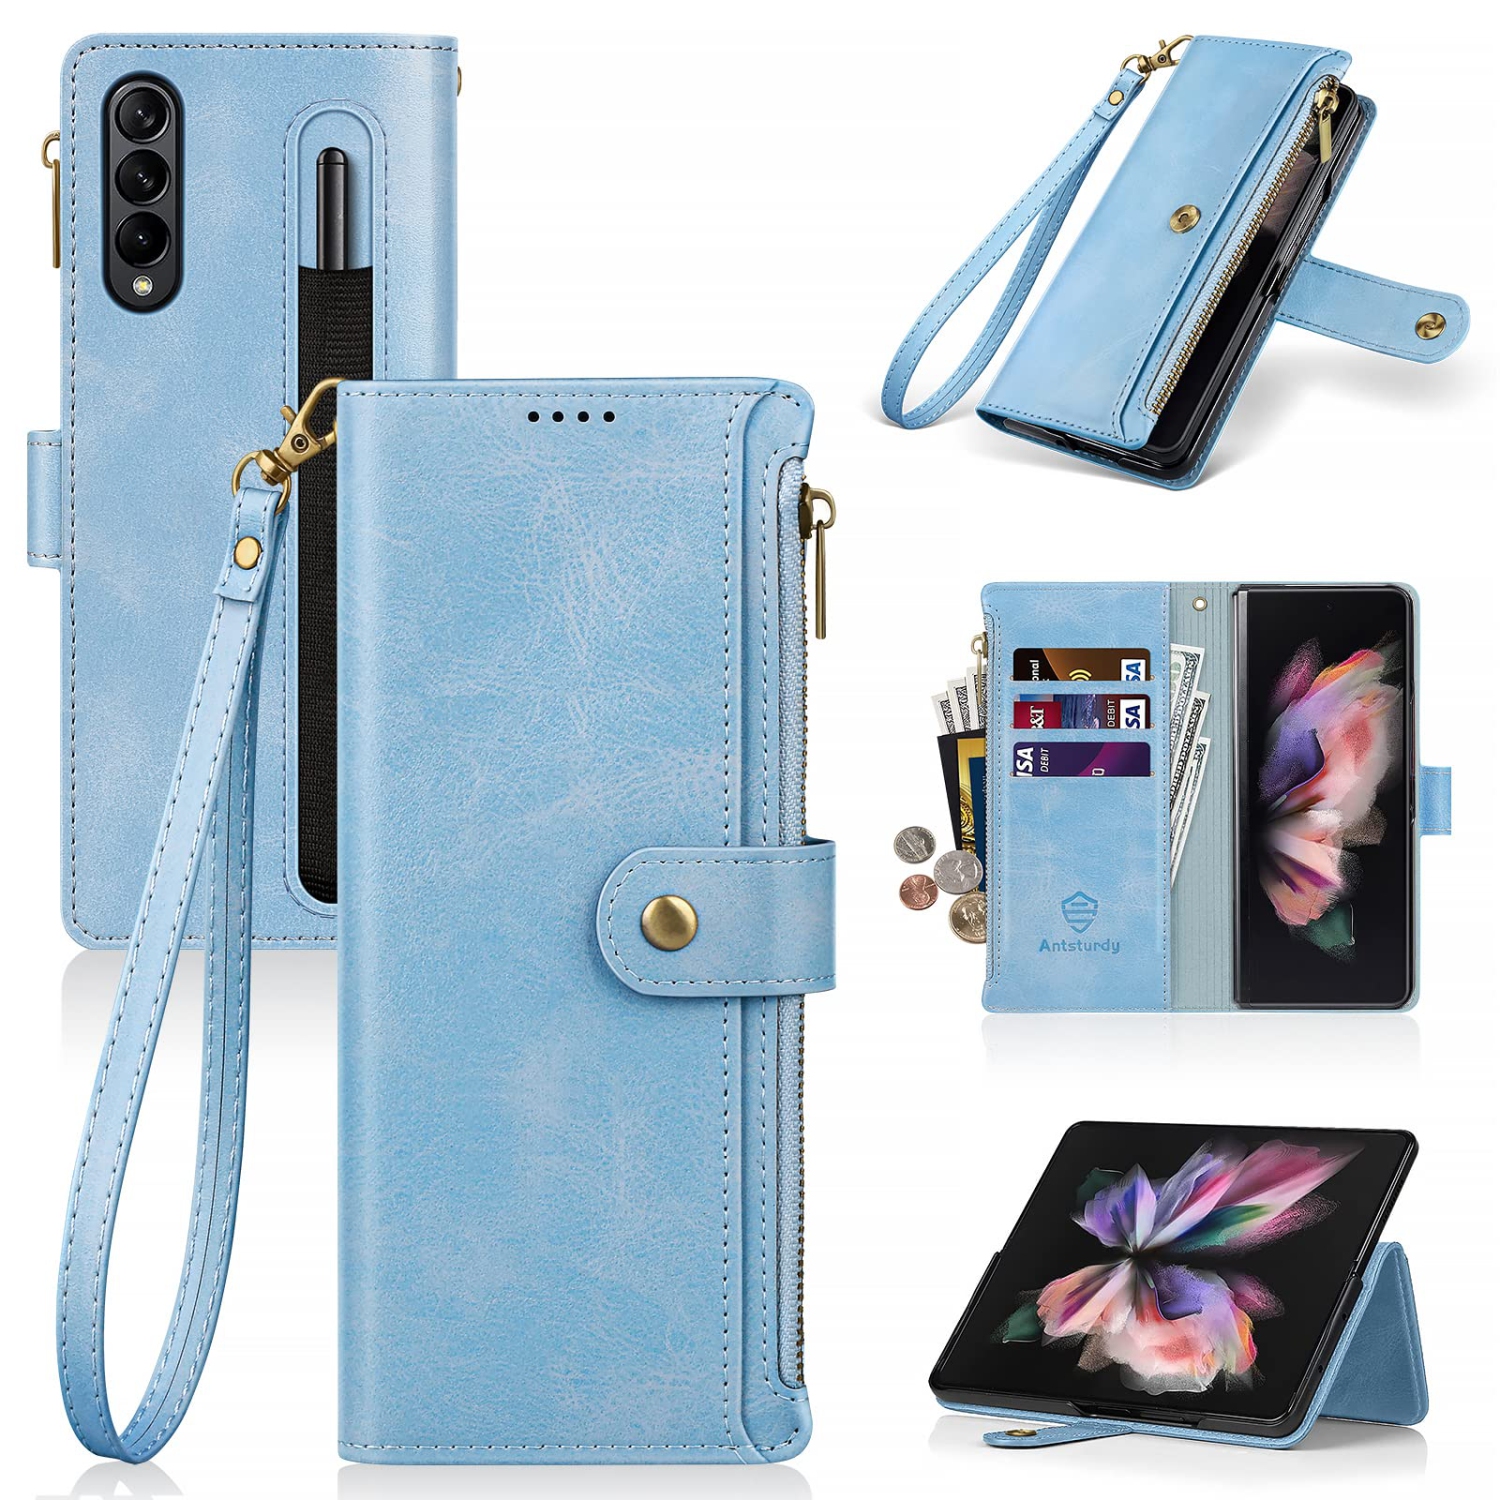 Antsturdy for Samsung Galaxy Z Fold 3 5G Wallet Case with S Pen Holder,PU Leather Folio Flip Protective Cover with Wrist Str